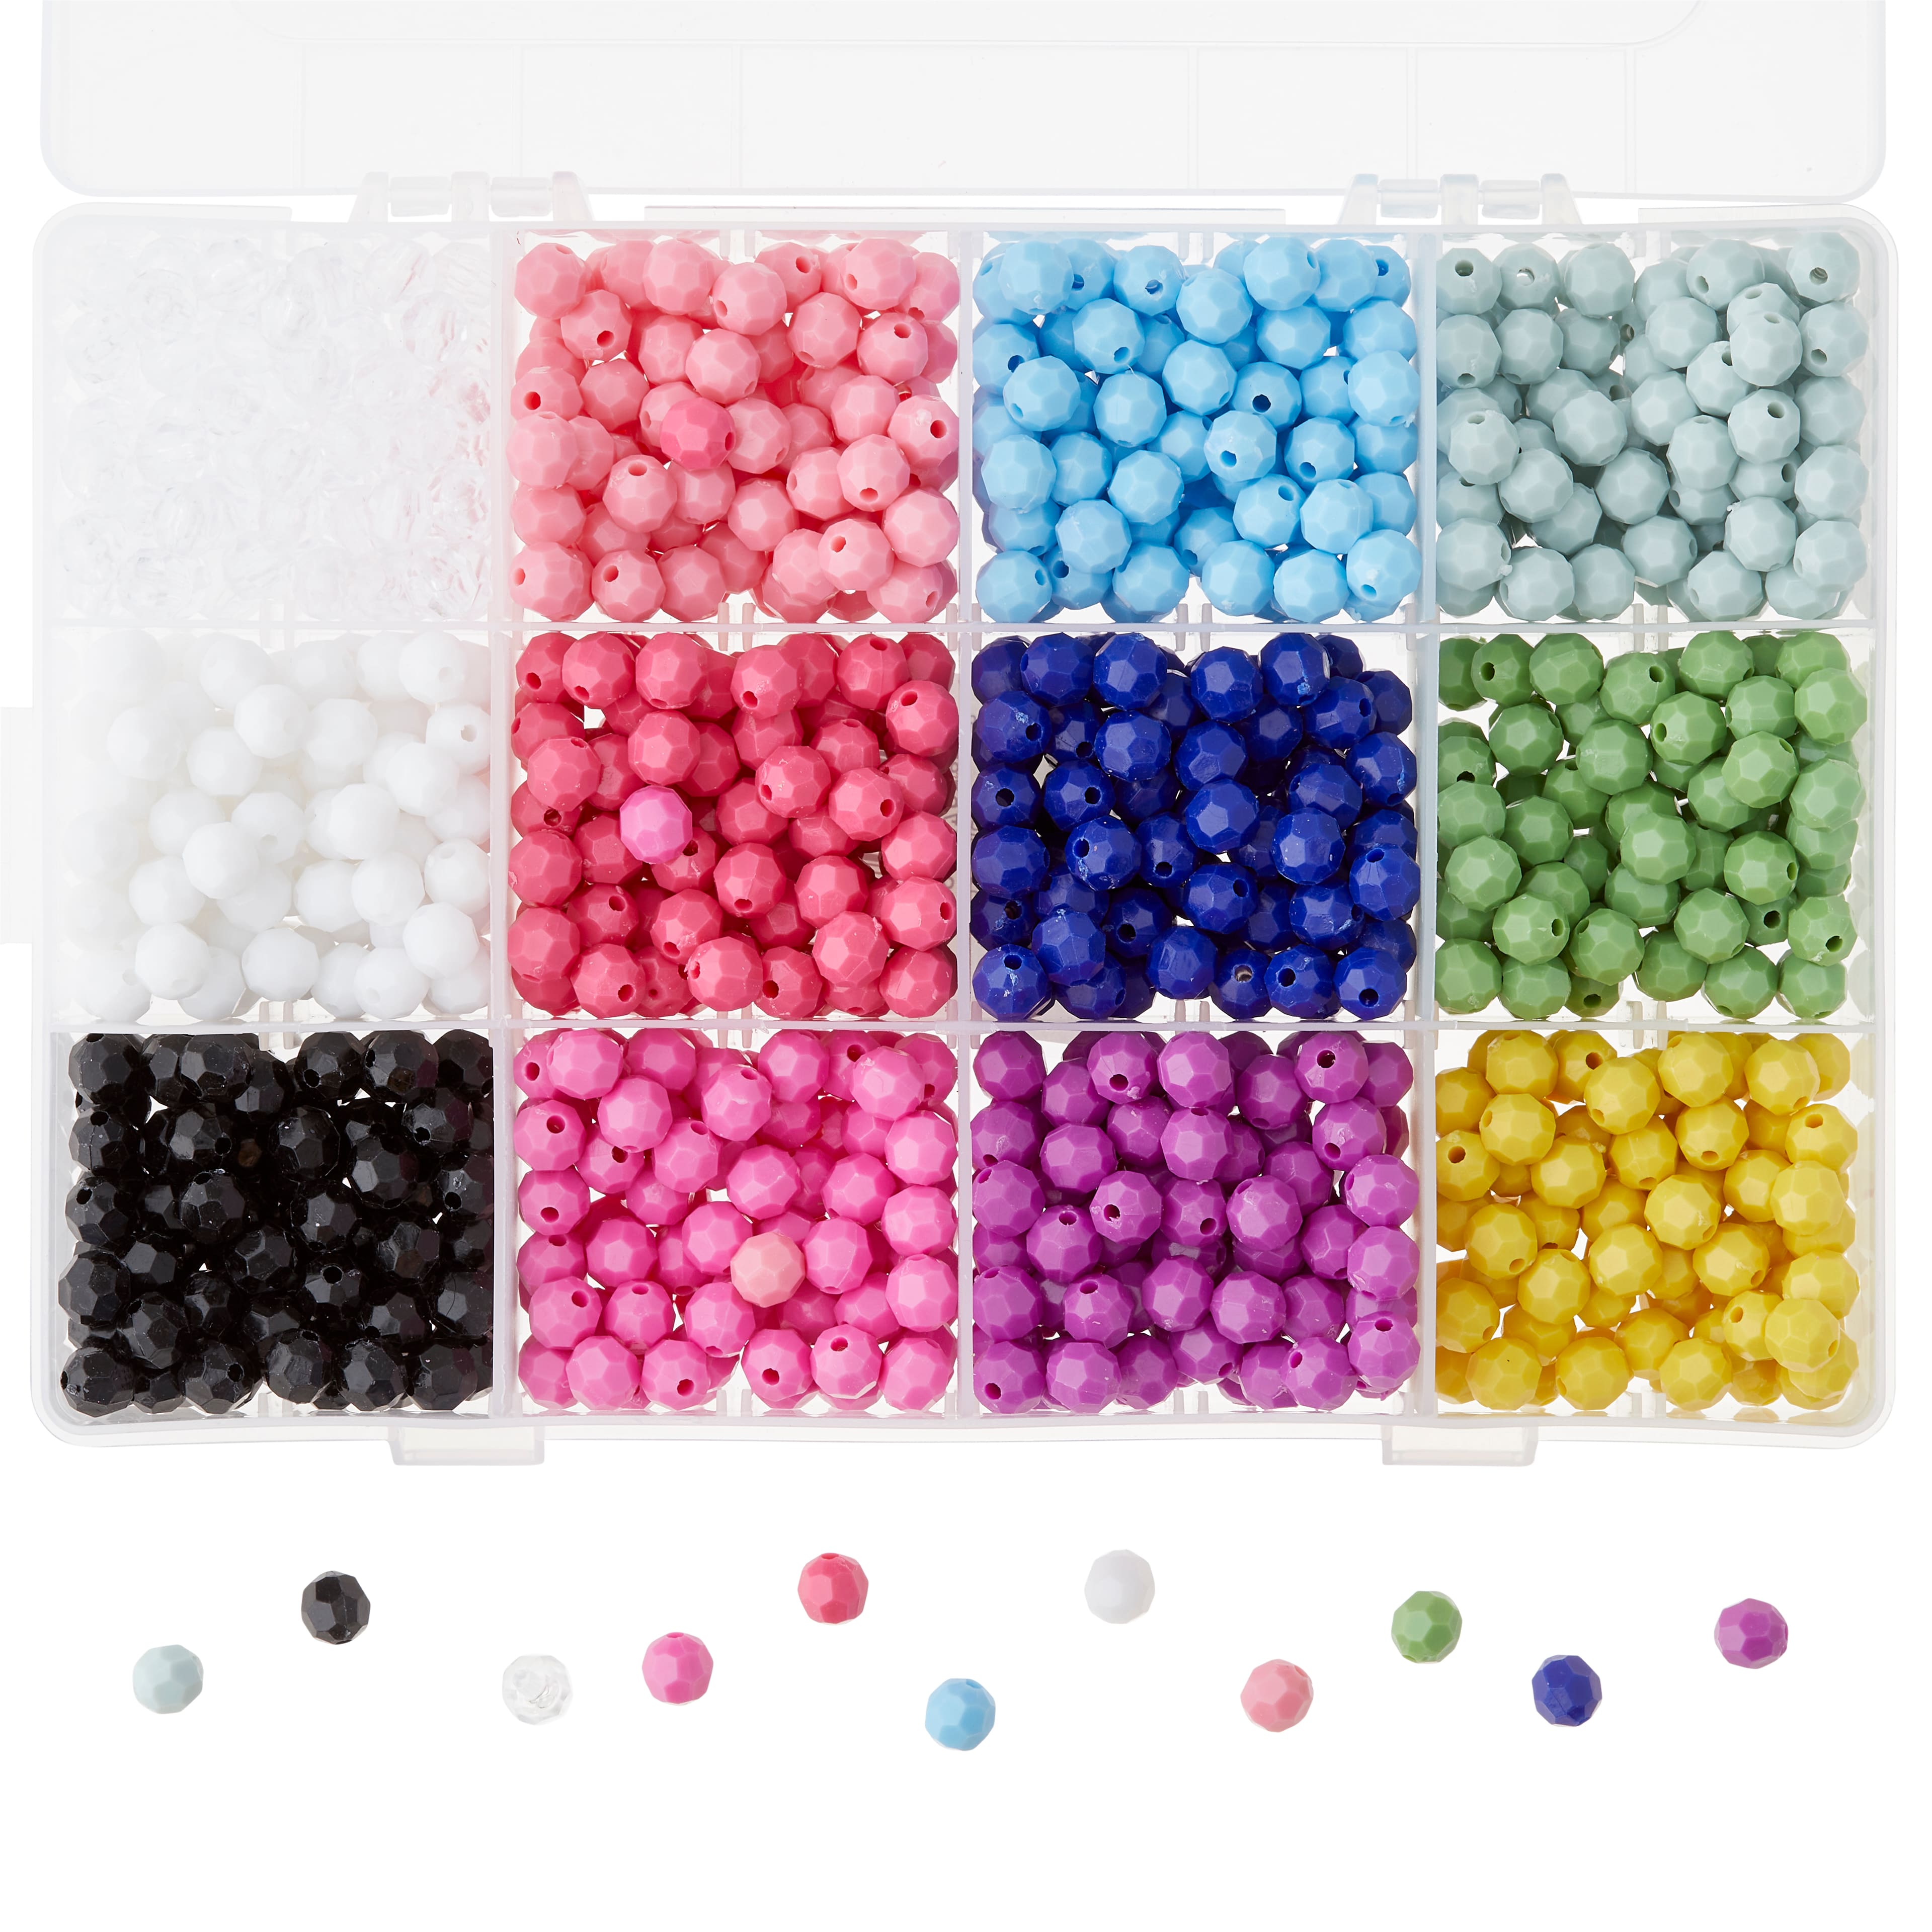 Pink & White Glass Pearl Bead Mix - Crafts for Kids and Fun Home Activities